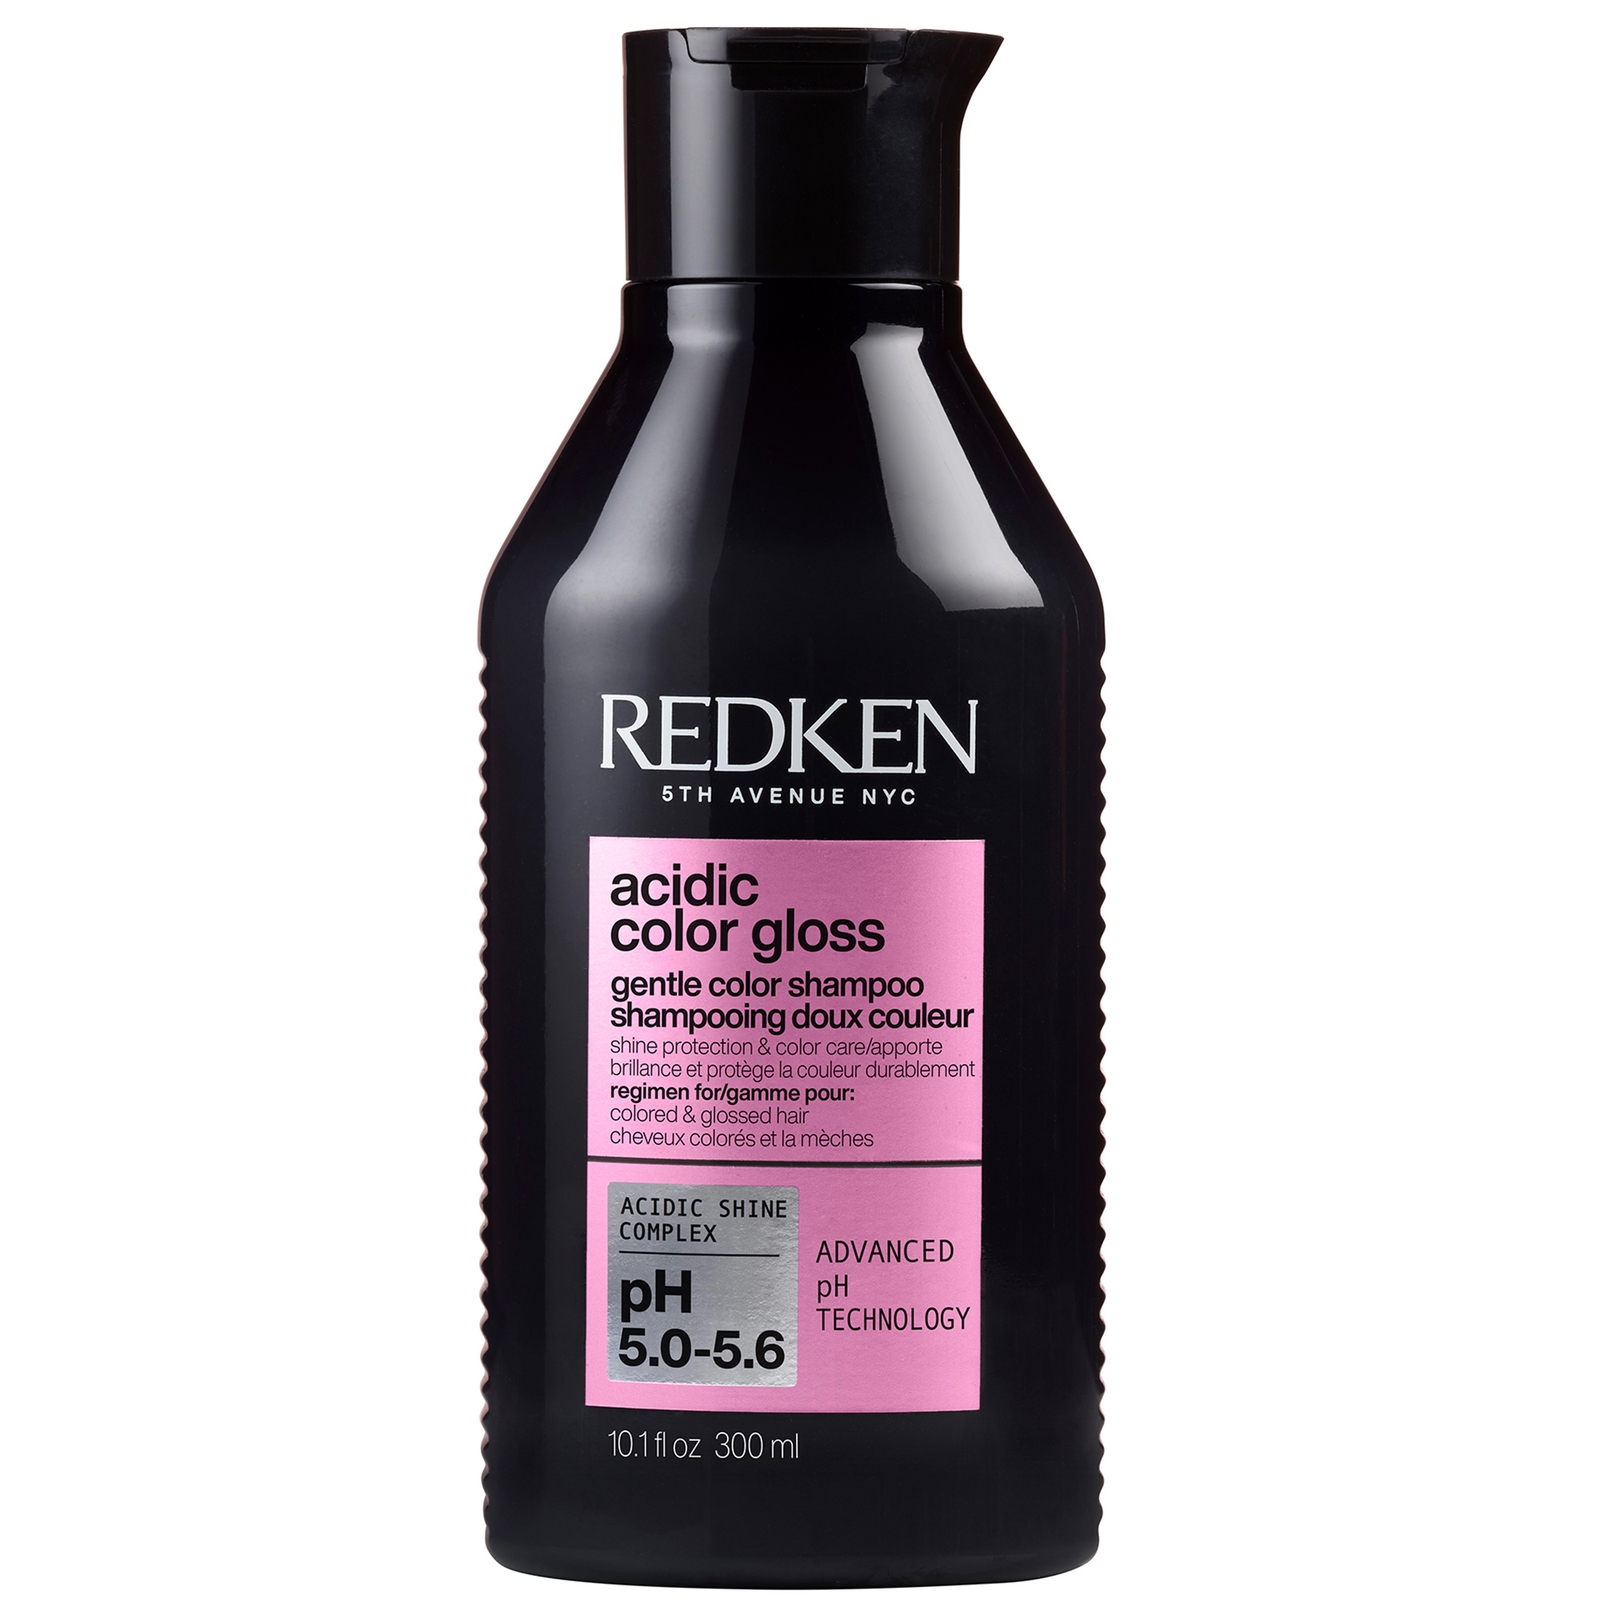 Redken Acidic Color Gloss Shampoo, Sulphate-Free for a Gentle Cleanse, Glass-Like Shine, For Coloure